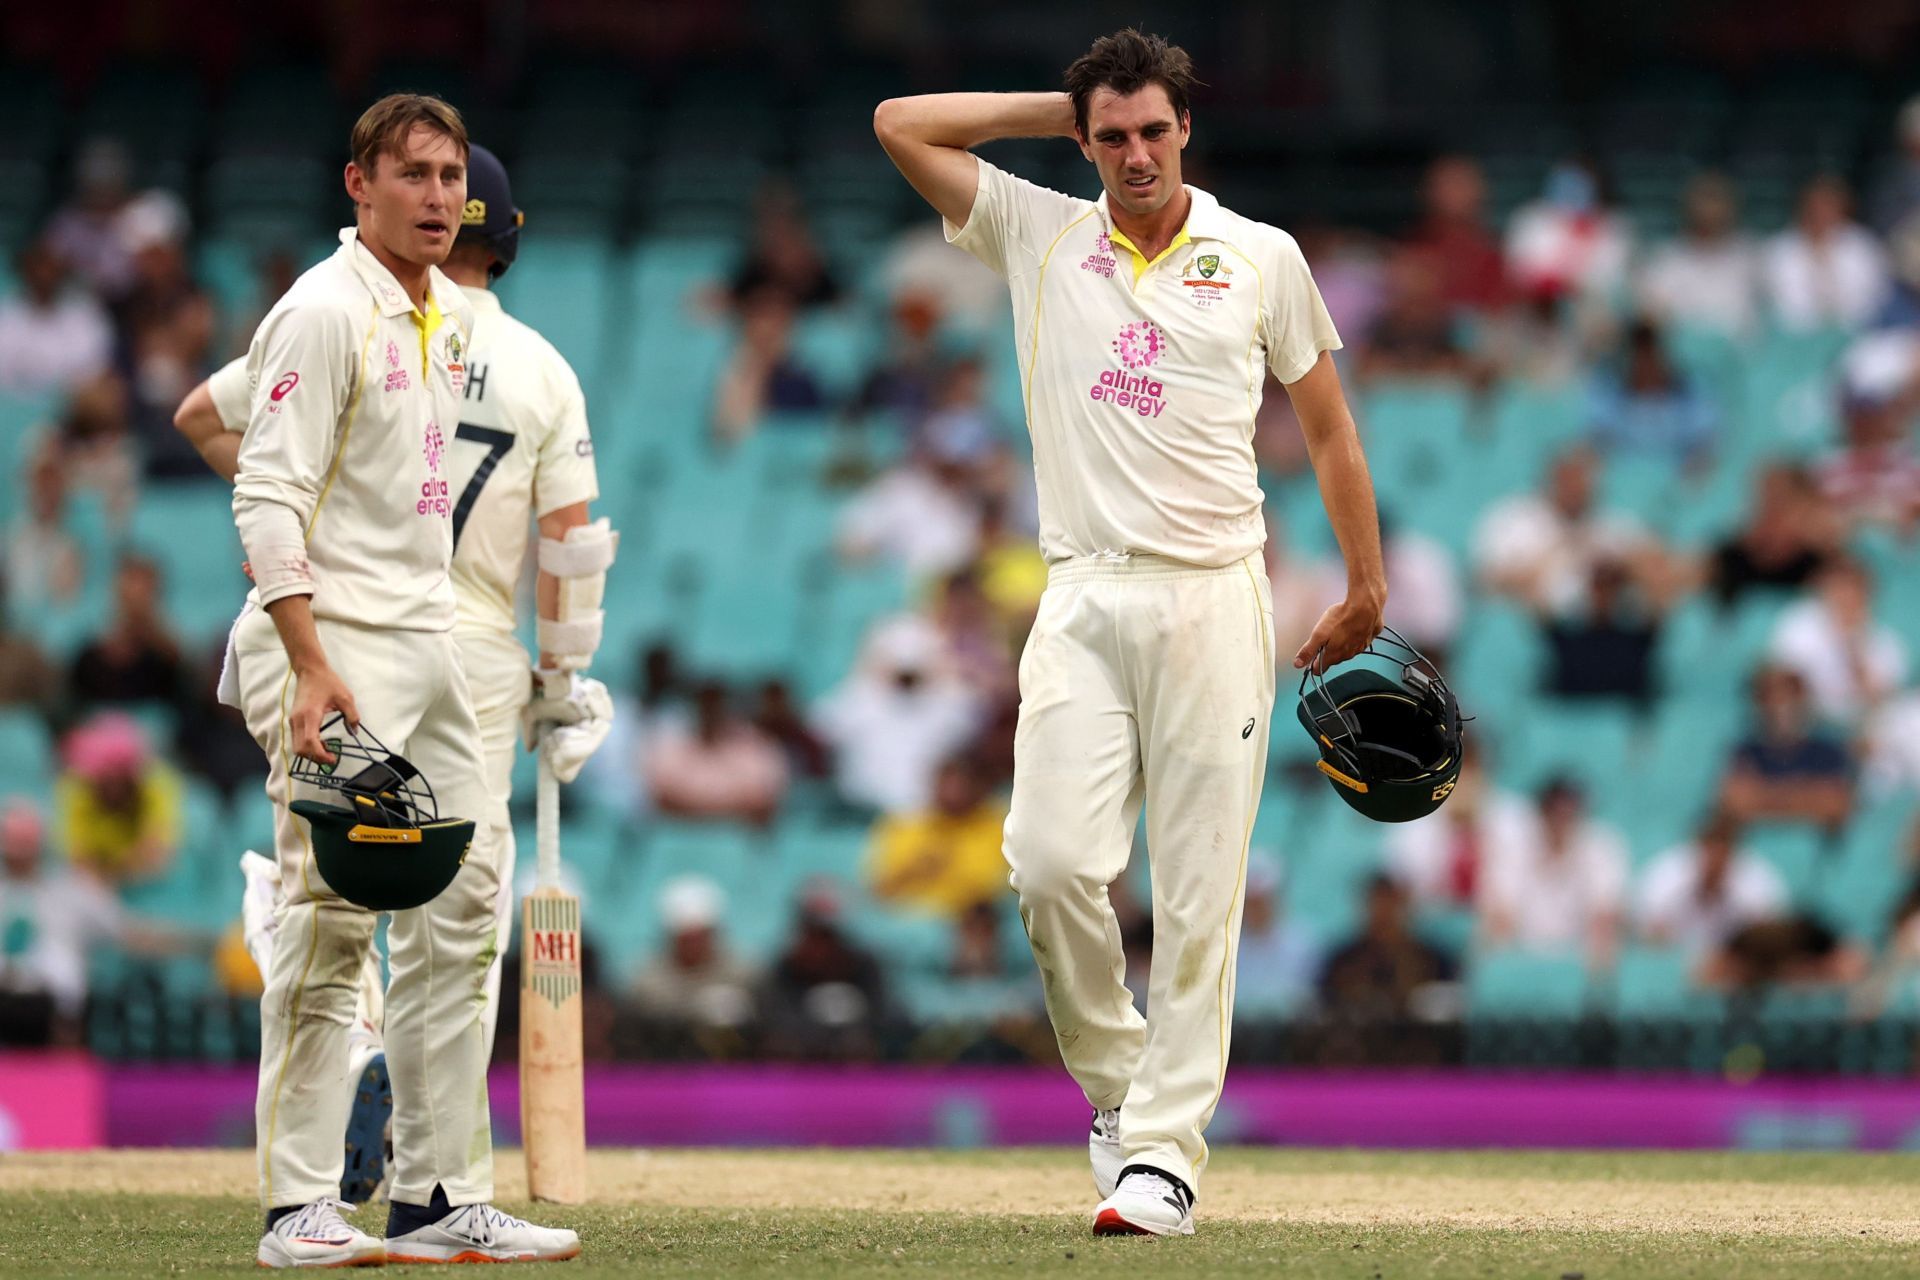 Australia were one wicket away from victory at the SCG, but England held on for the draw.